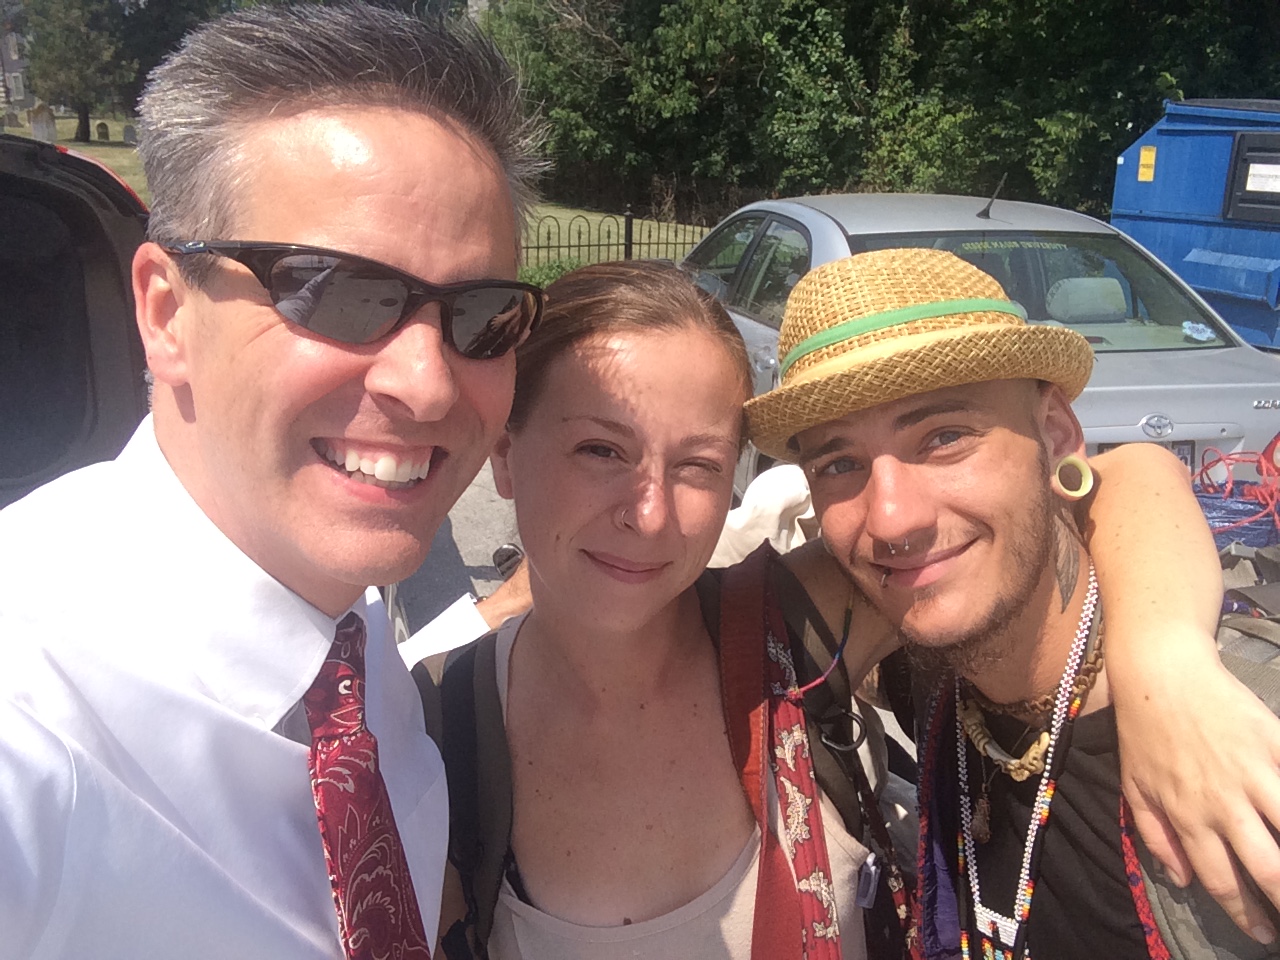 How I picked up two tattooed hitchhikers and learned something about Christianity